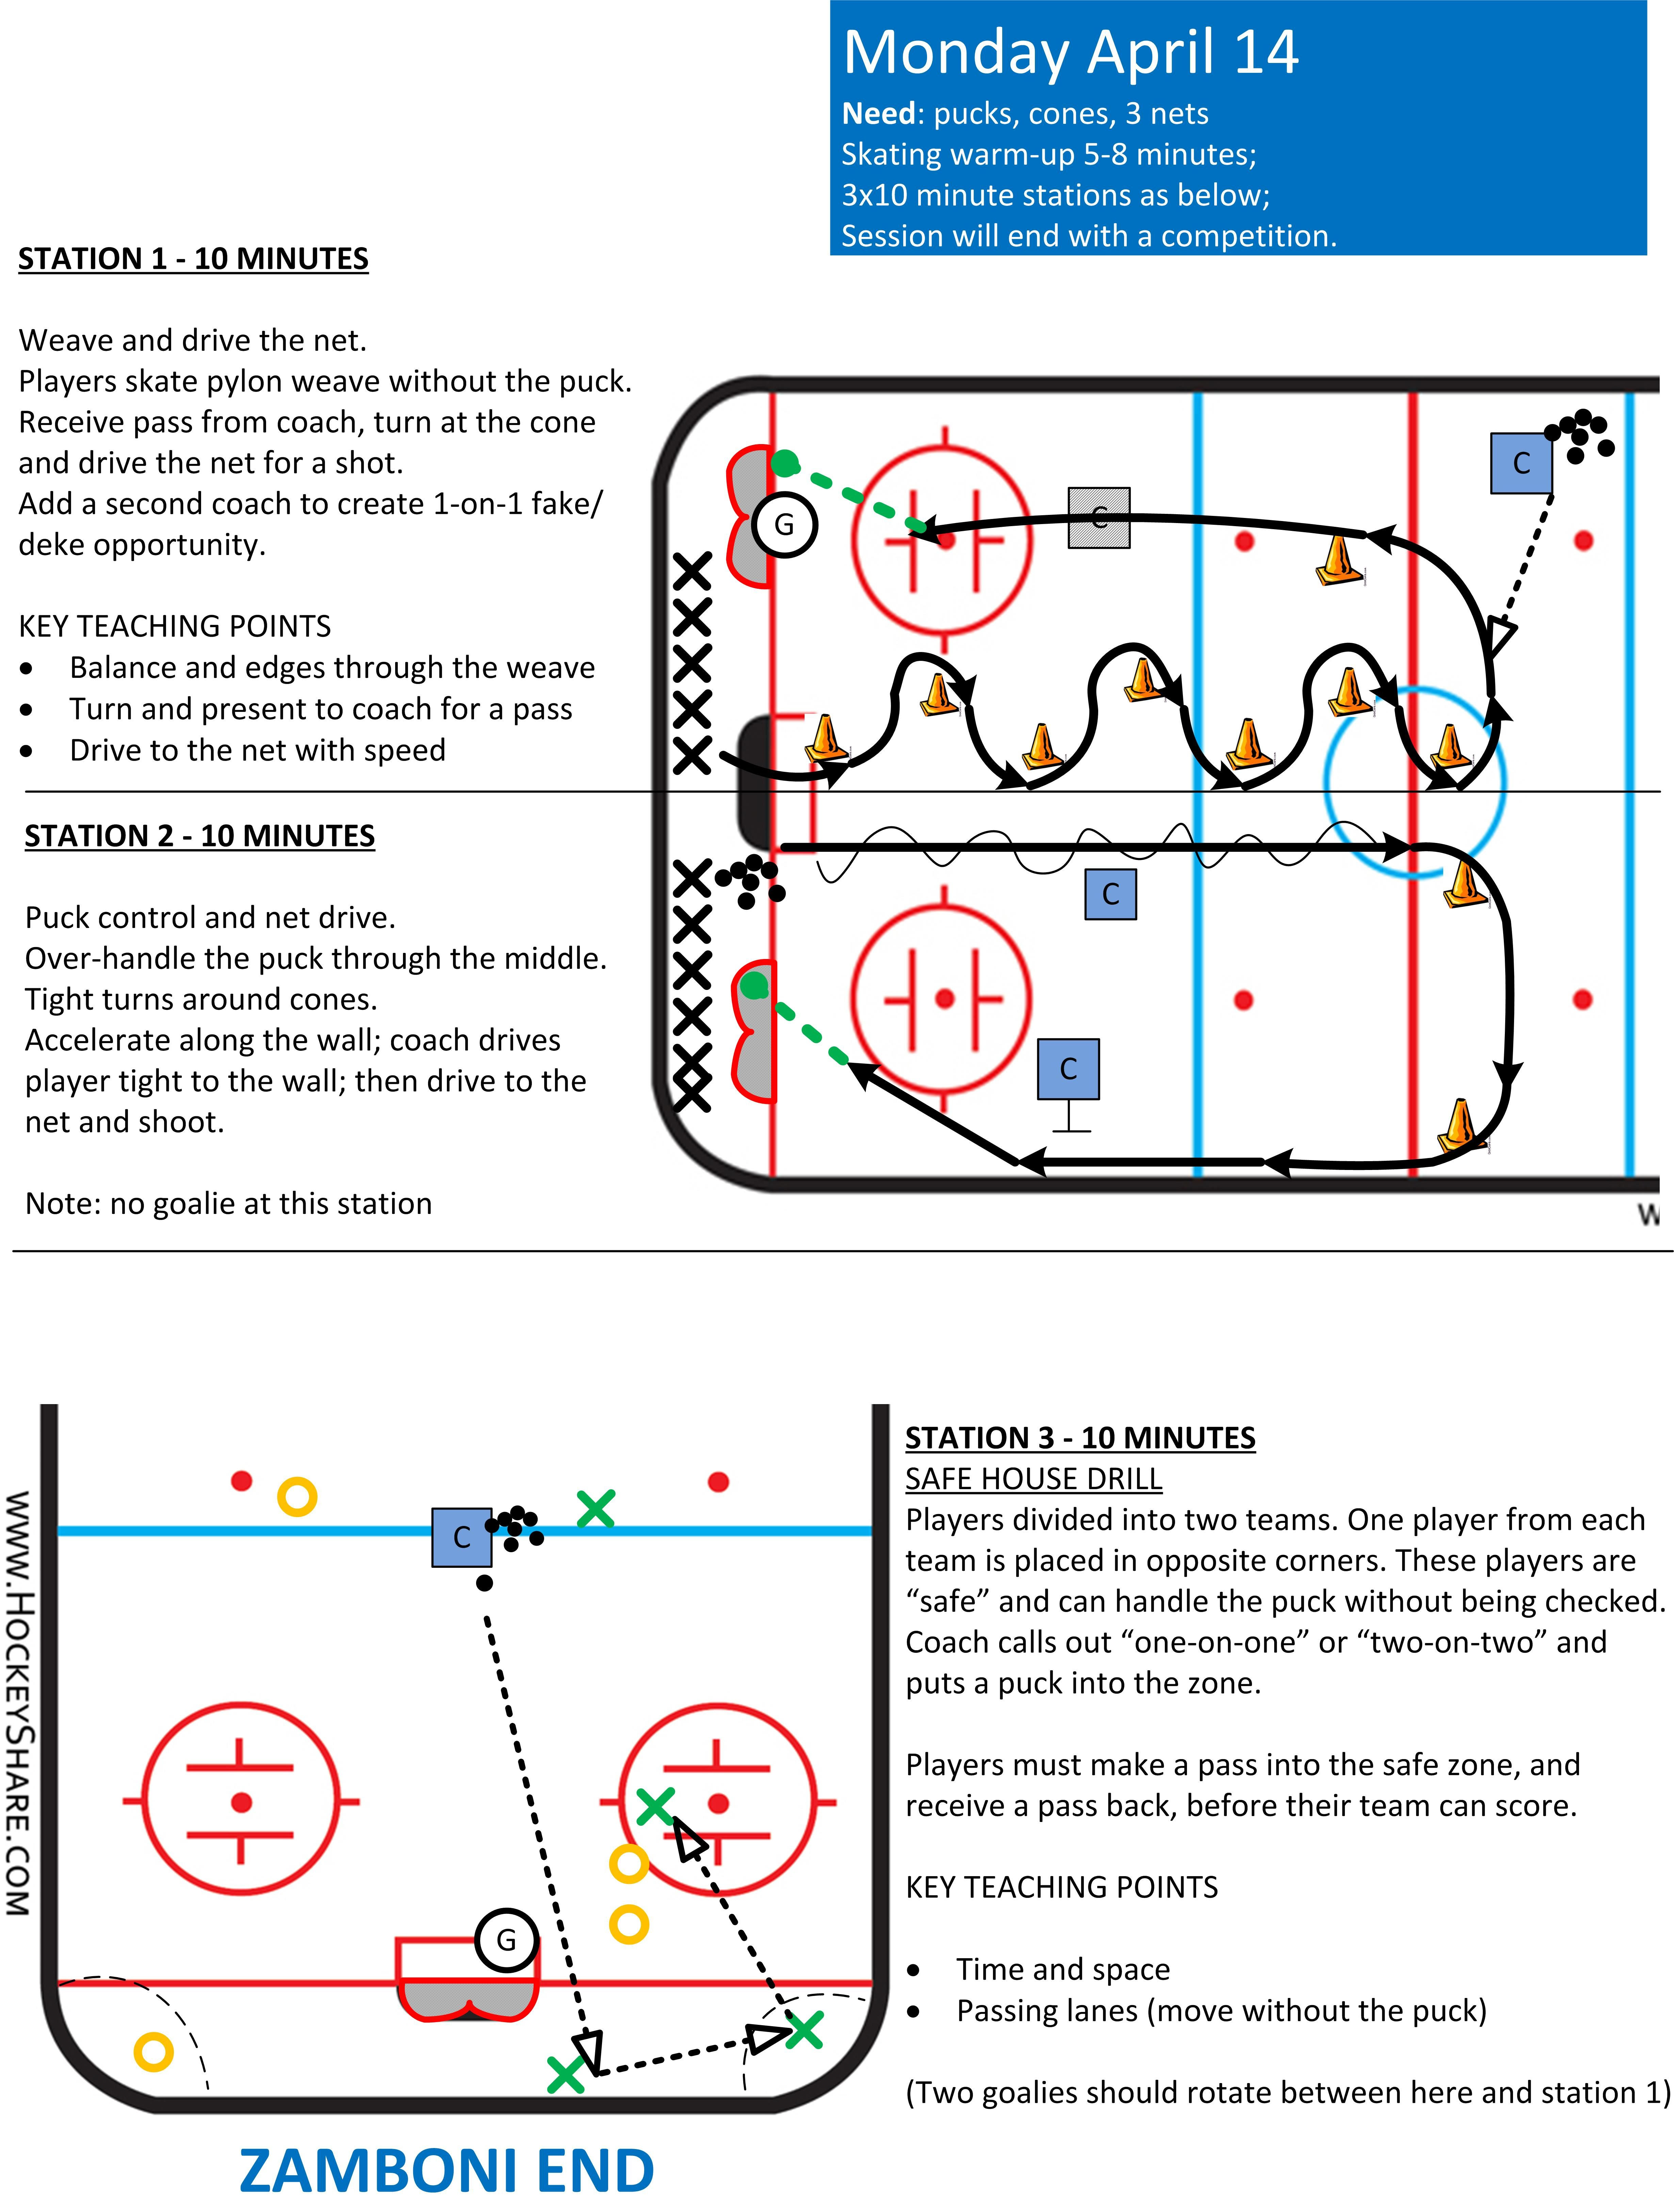 Full ice practice plan for Novice / U8, with three stations. One